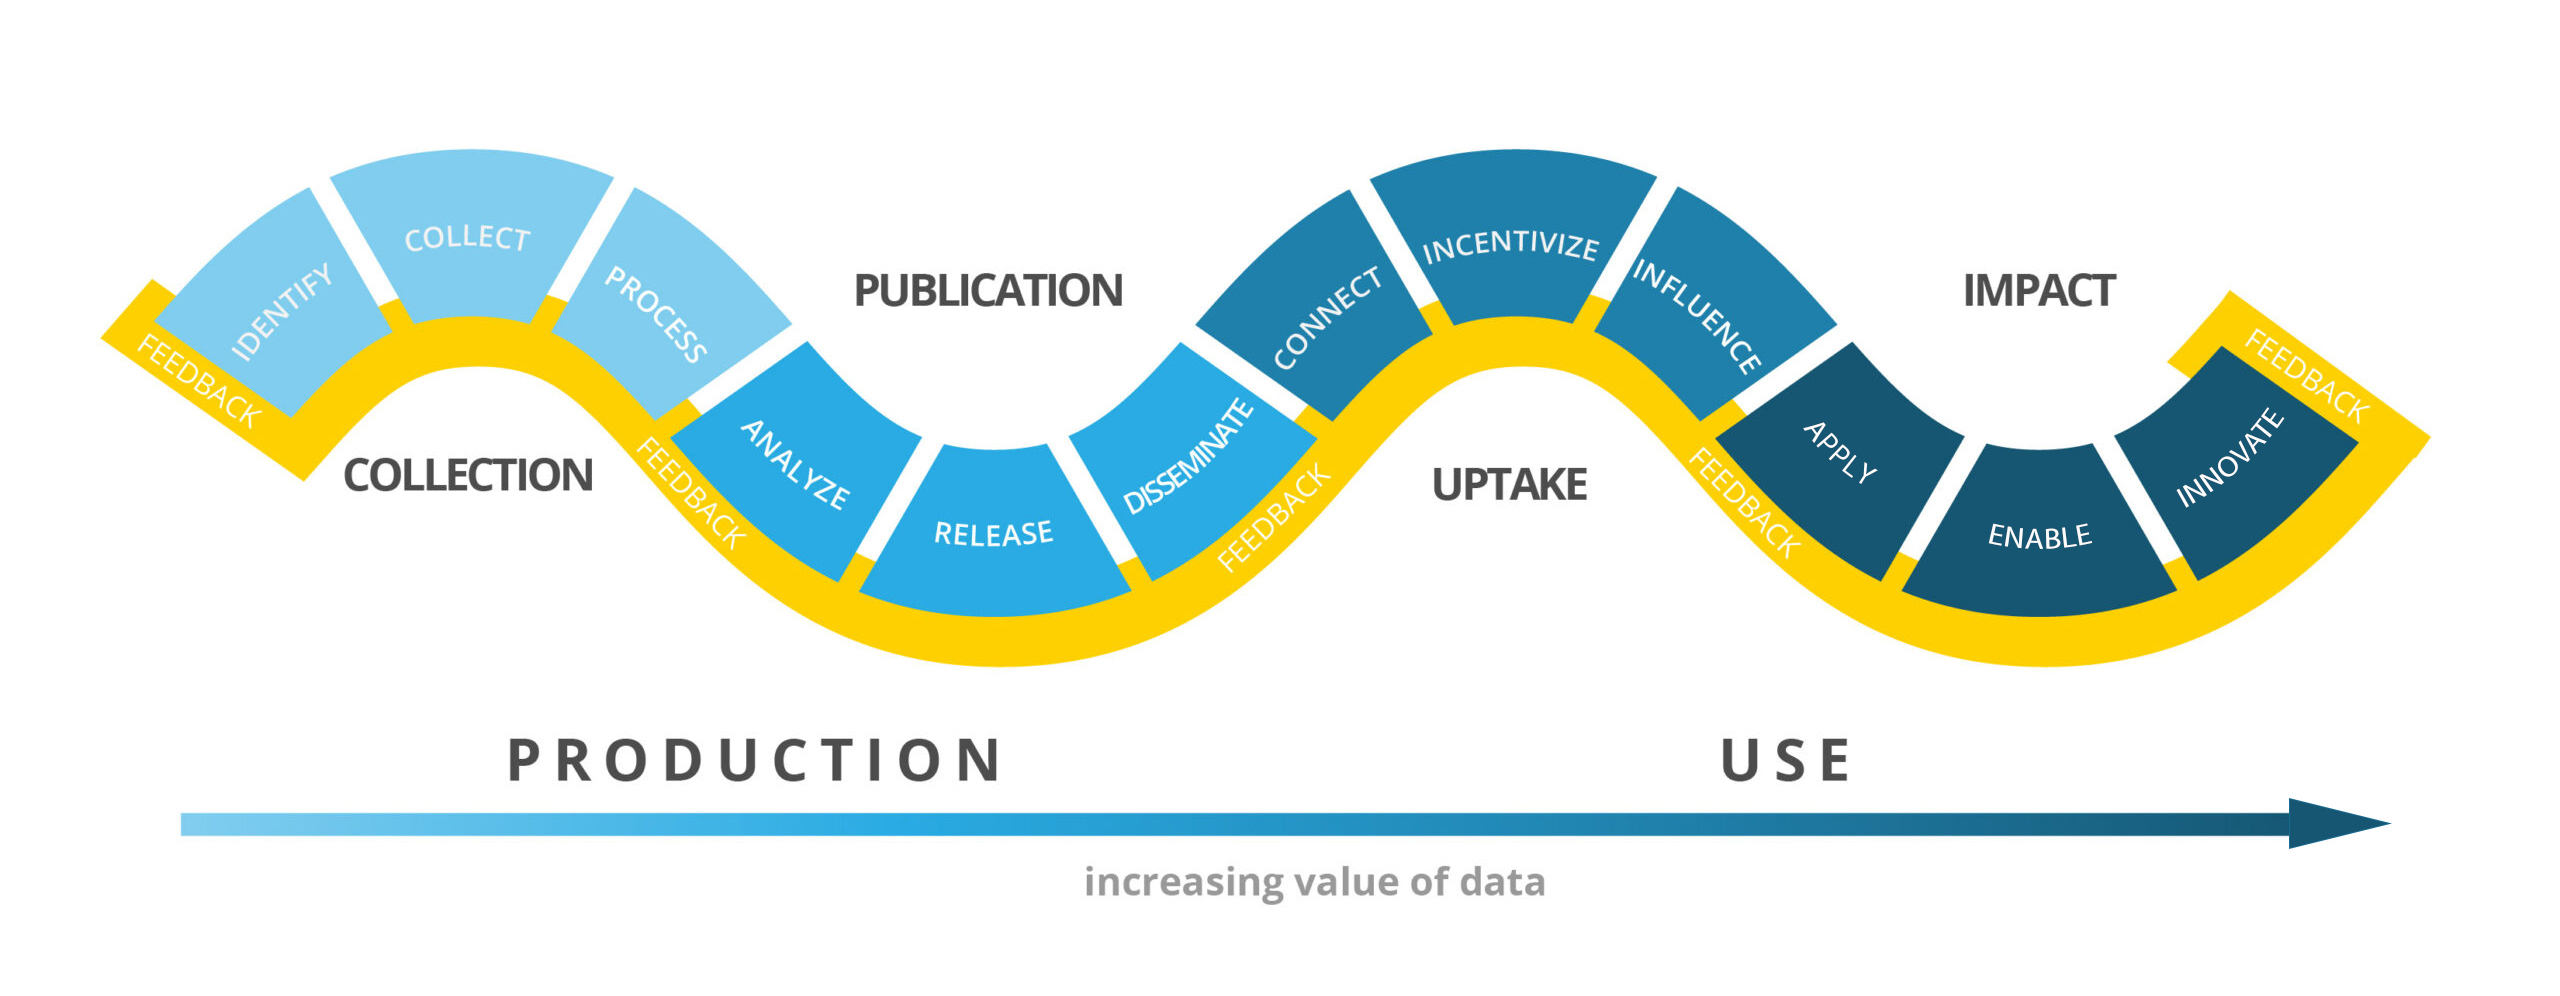 After data is produced, its value increases with use 